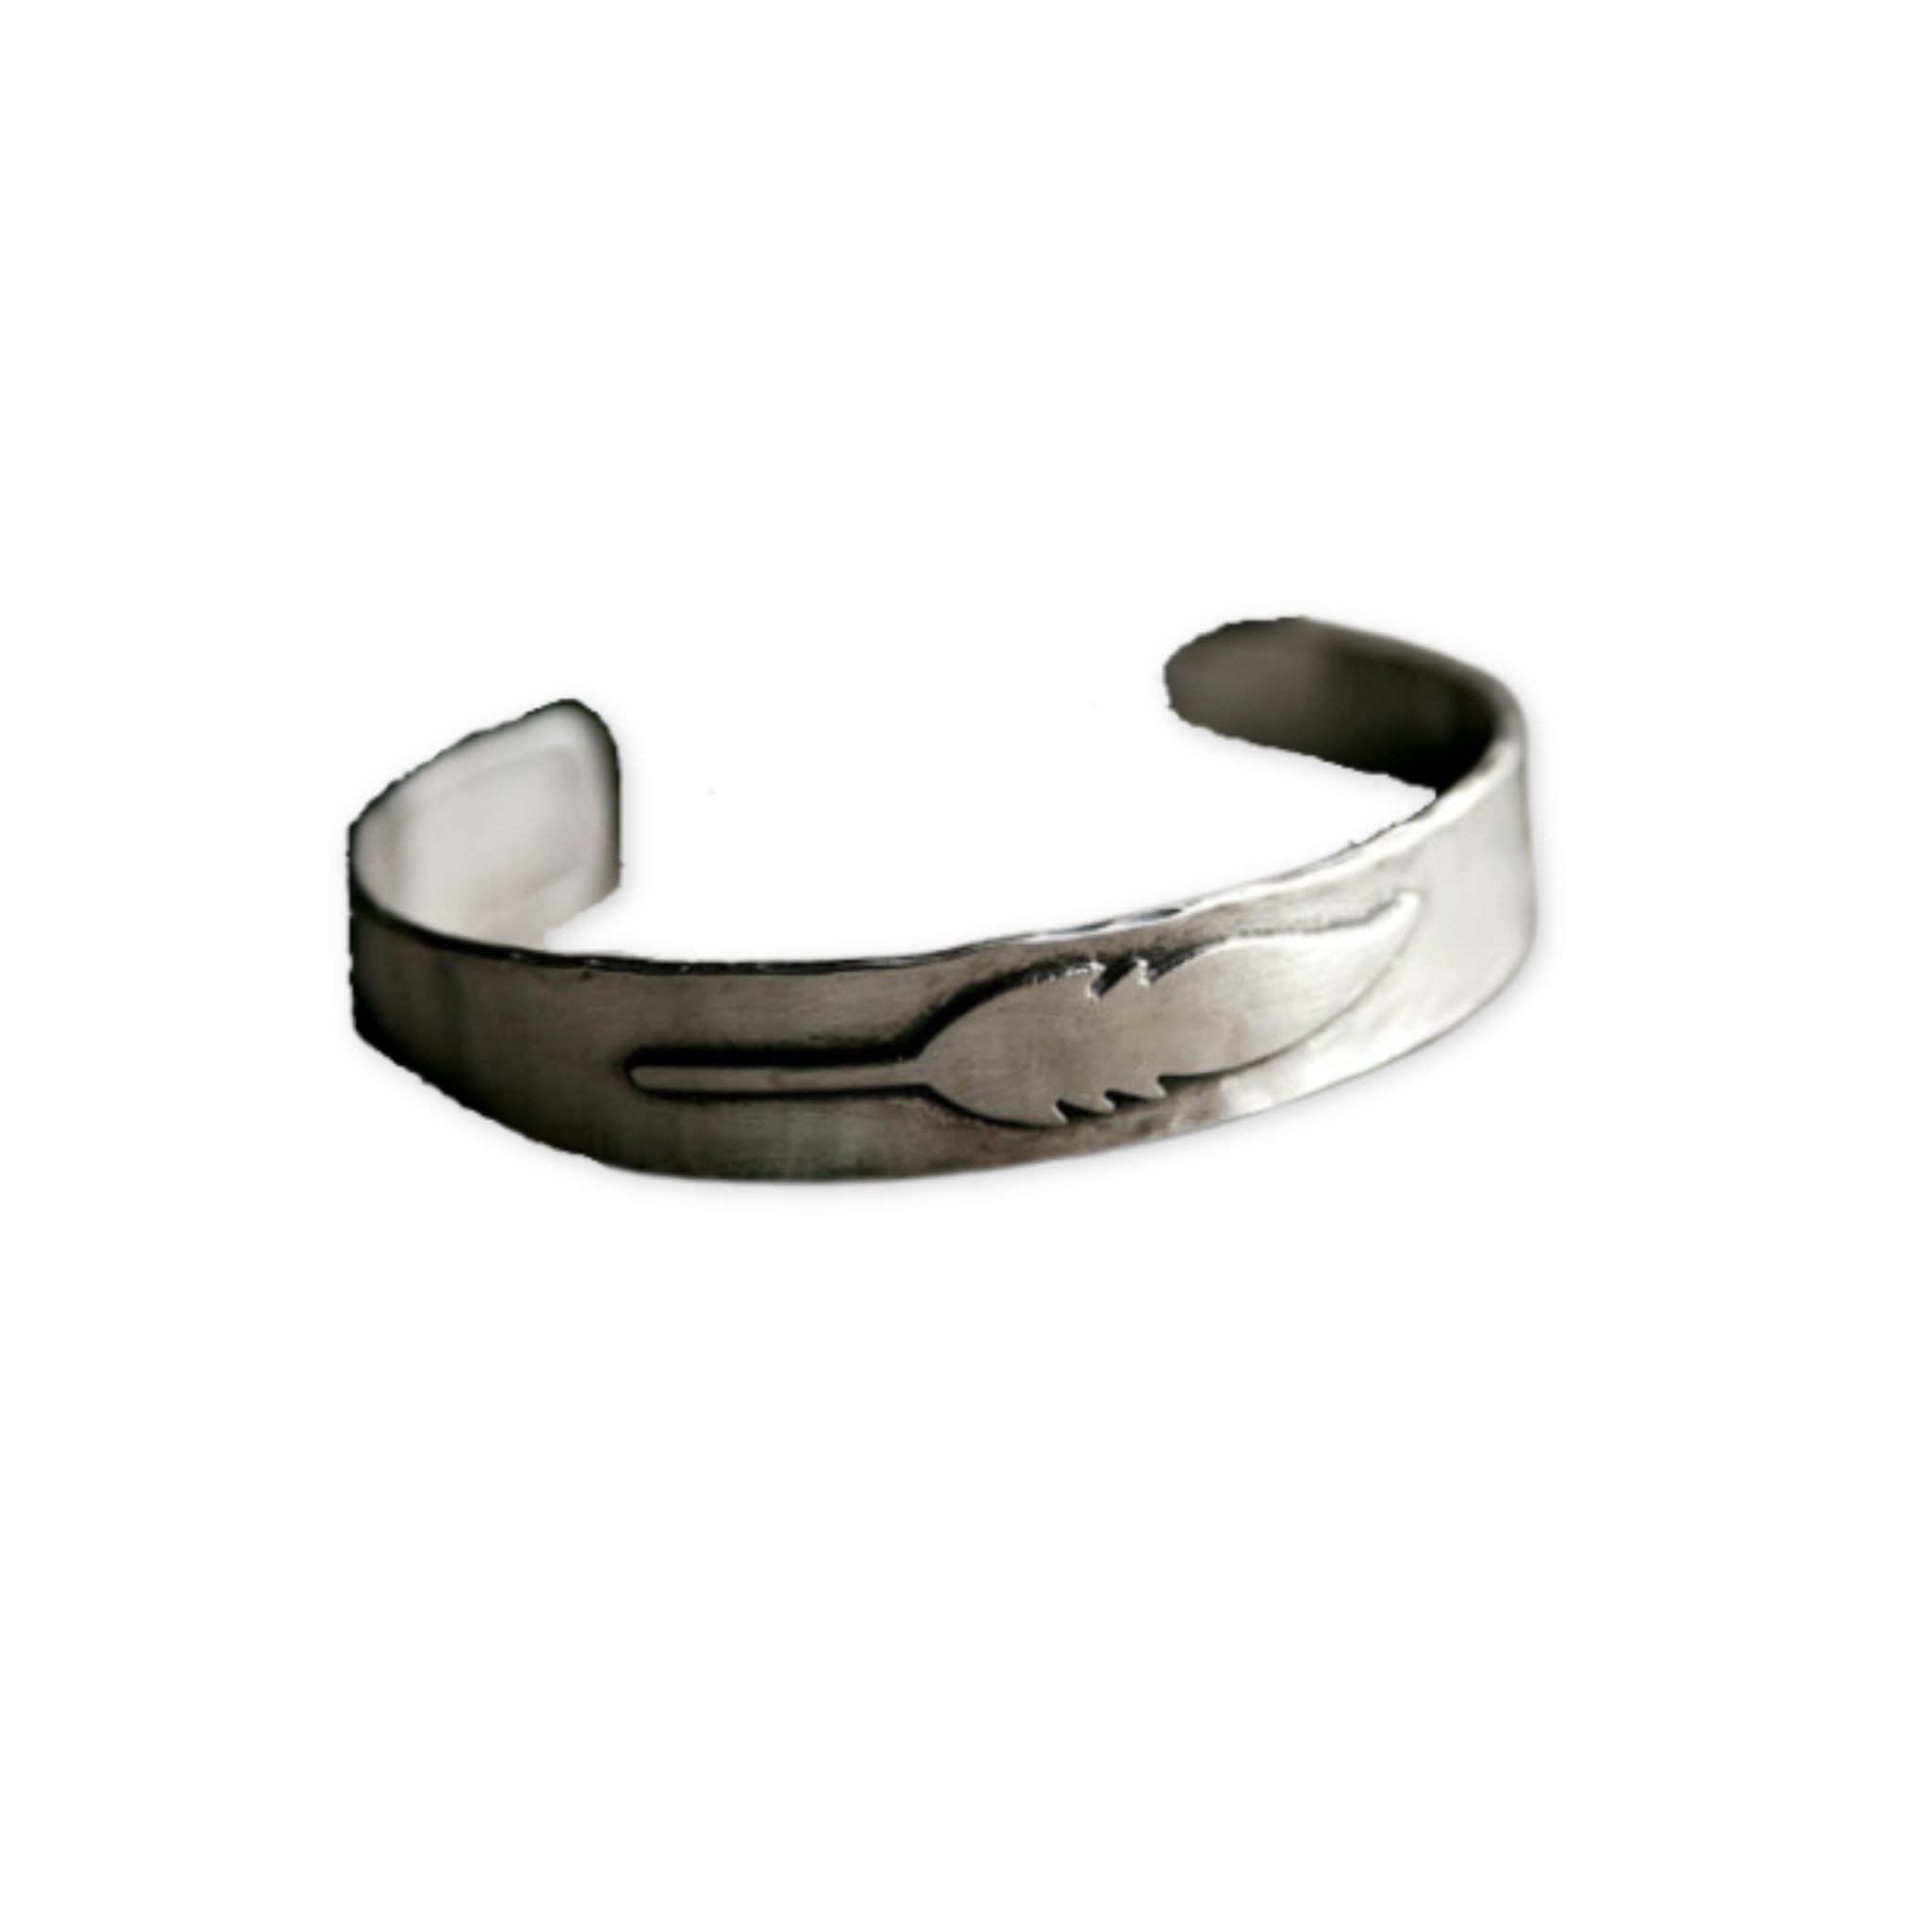 silver cuff bracelet with a feather